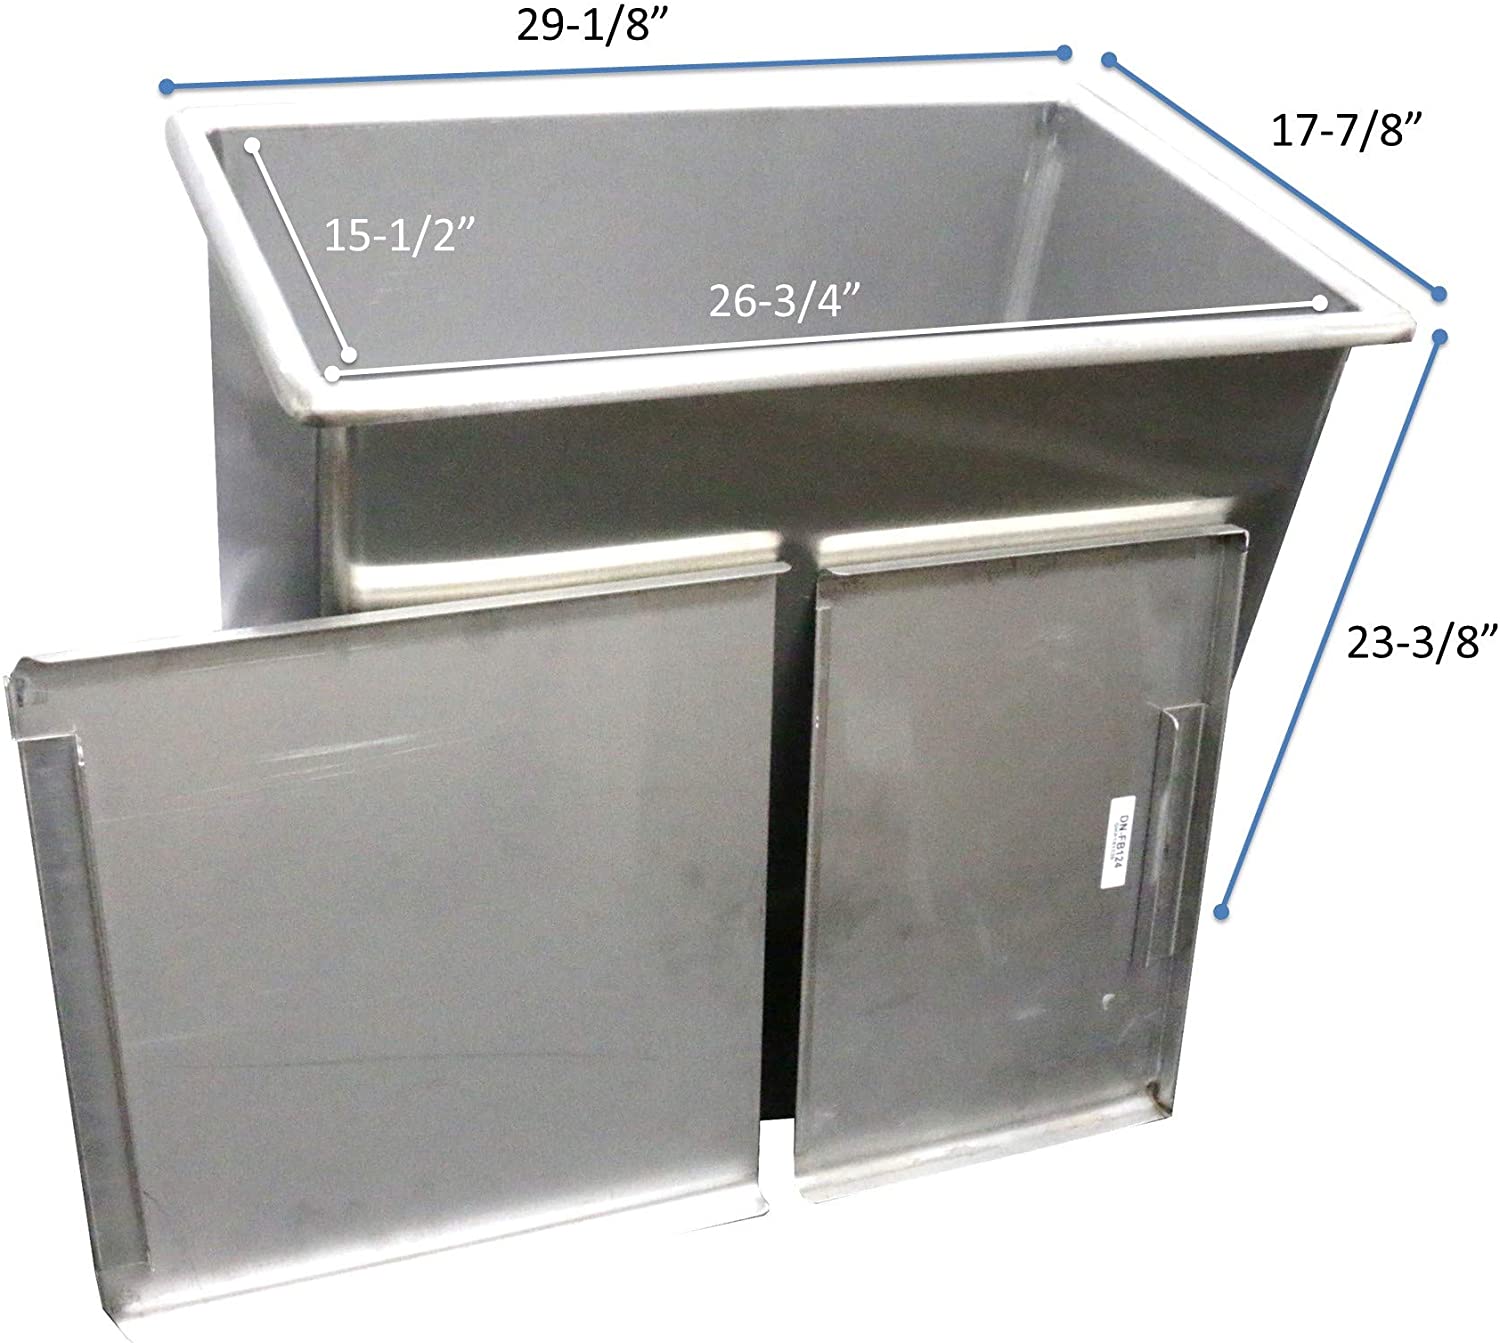 GSW Stainless Steel Commercial Flour Container with Two Sliding Cover